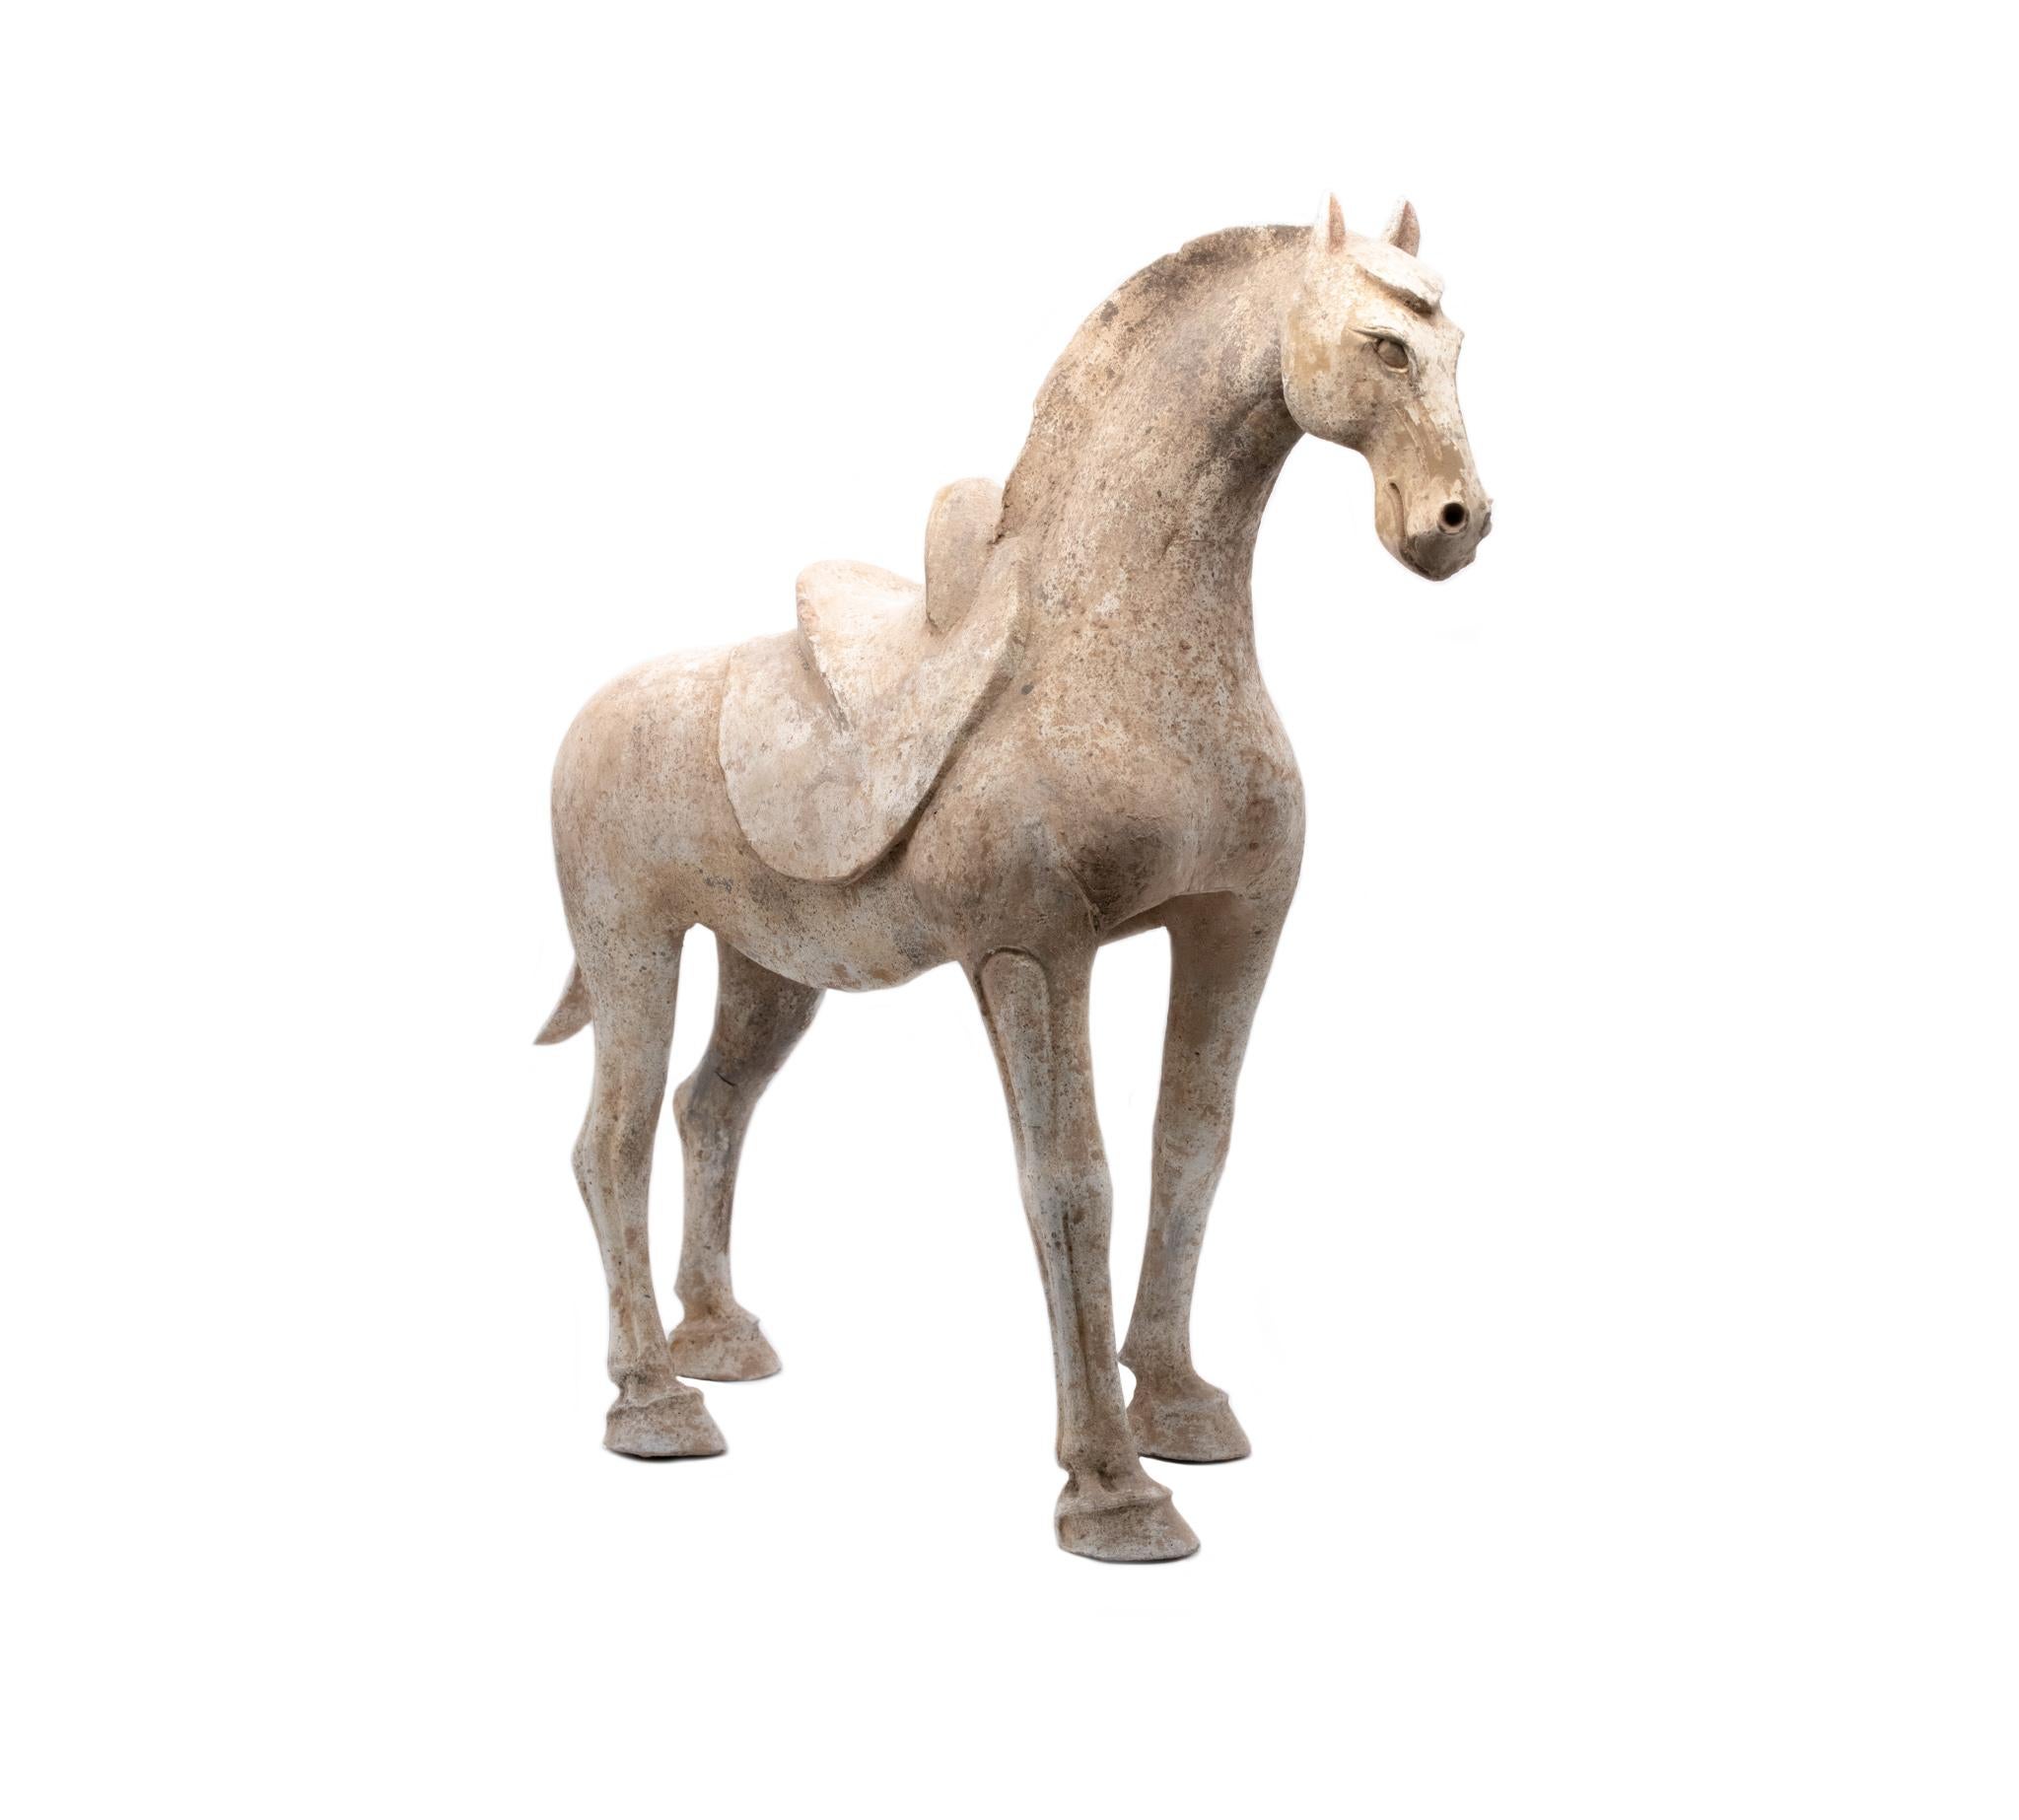 Standing horse from the Tang Dynasty 618-907 AD.

Beautiful sculptural piece of art from the Chinese ancient period of the Tang Dynasty (618-907 AD) featuring the finely sculptural figure of a horse, carefully made of earthenware clay pottery.

